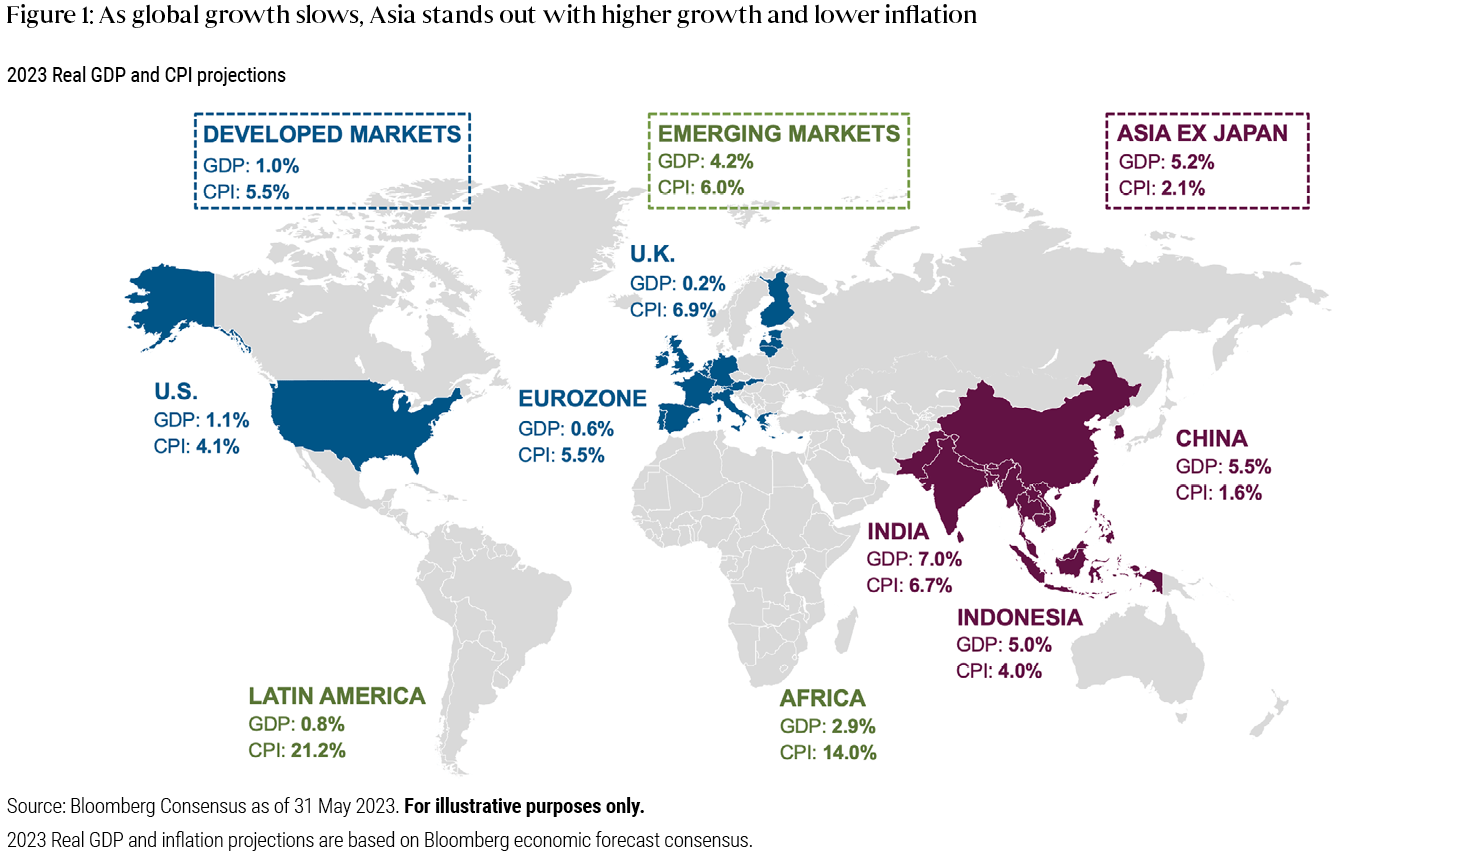 This infographic consists of a world map with several key countries and regions highlighted: developed markets in blue, emerging markets in green, and Asia ex Japan in maroon. For these highlighted locations, their respective 2023 annual real Gross Domestic Product (GDP) and Consumer Price Index (CPI) projections, based on Bloomberg economic forecast consensus, are stated. In terms of GDP, Asia ex Japan is expected to grow by 5.2%, emerging markets 4.2% and developed markets 1.0%. In terms of CPI, Asia ex Japan is expected to increase by 2.1%, developed markets 5.5% and emerging markets 6.0%. This data supports PIMCO’s belief that Asia has bigger upside potential than developed markets, with forecasts of both higher growth and lower inflation. Data is as of 31 May 2023. For illustrative purposes only.